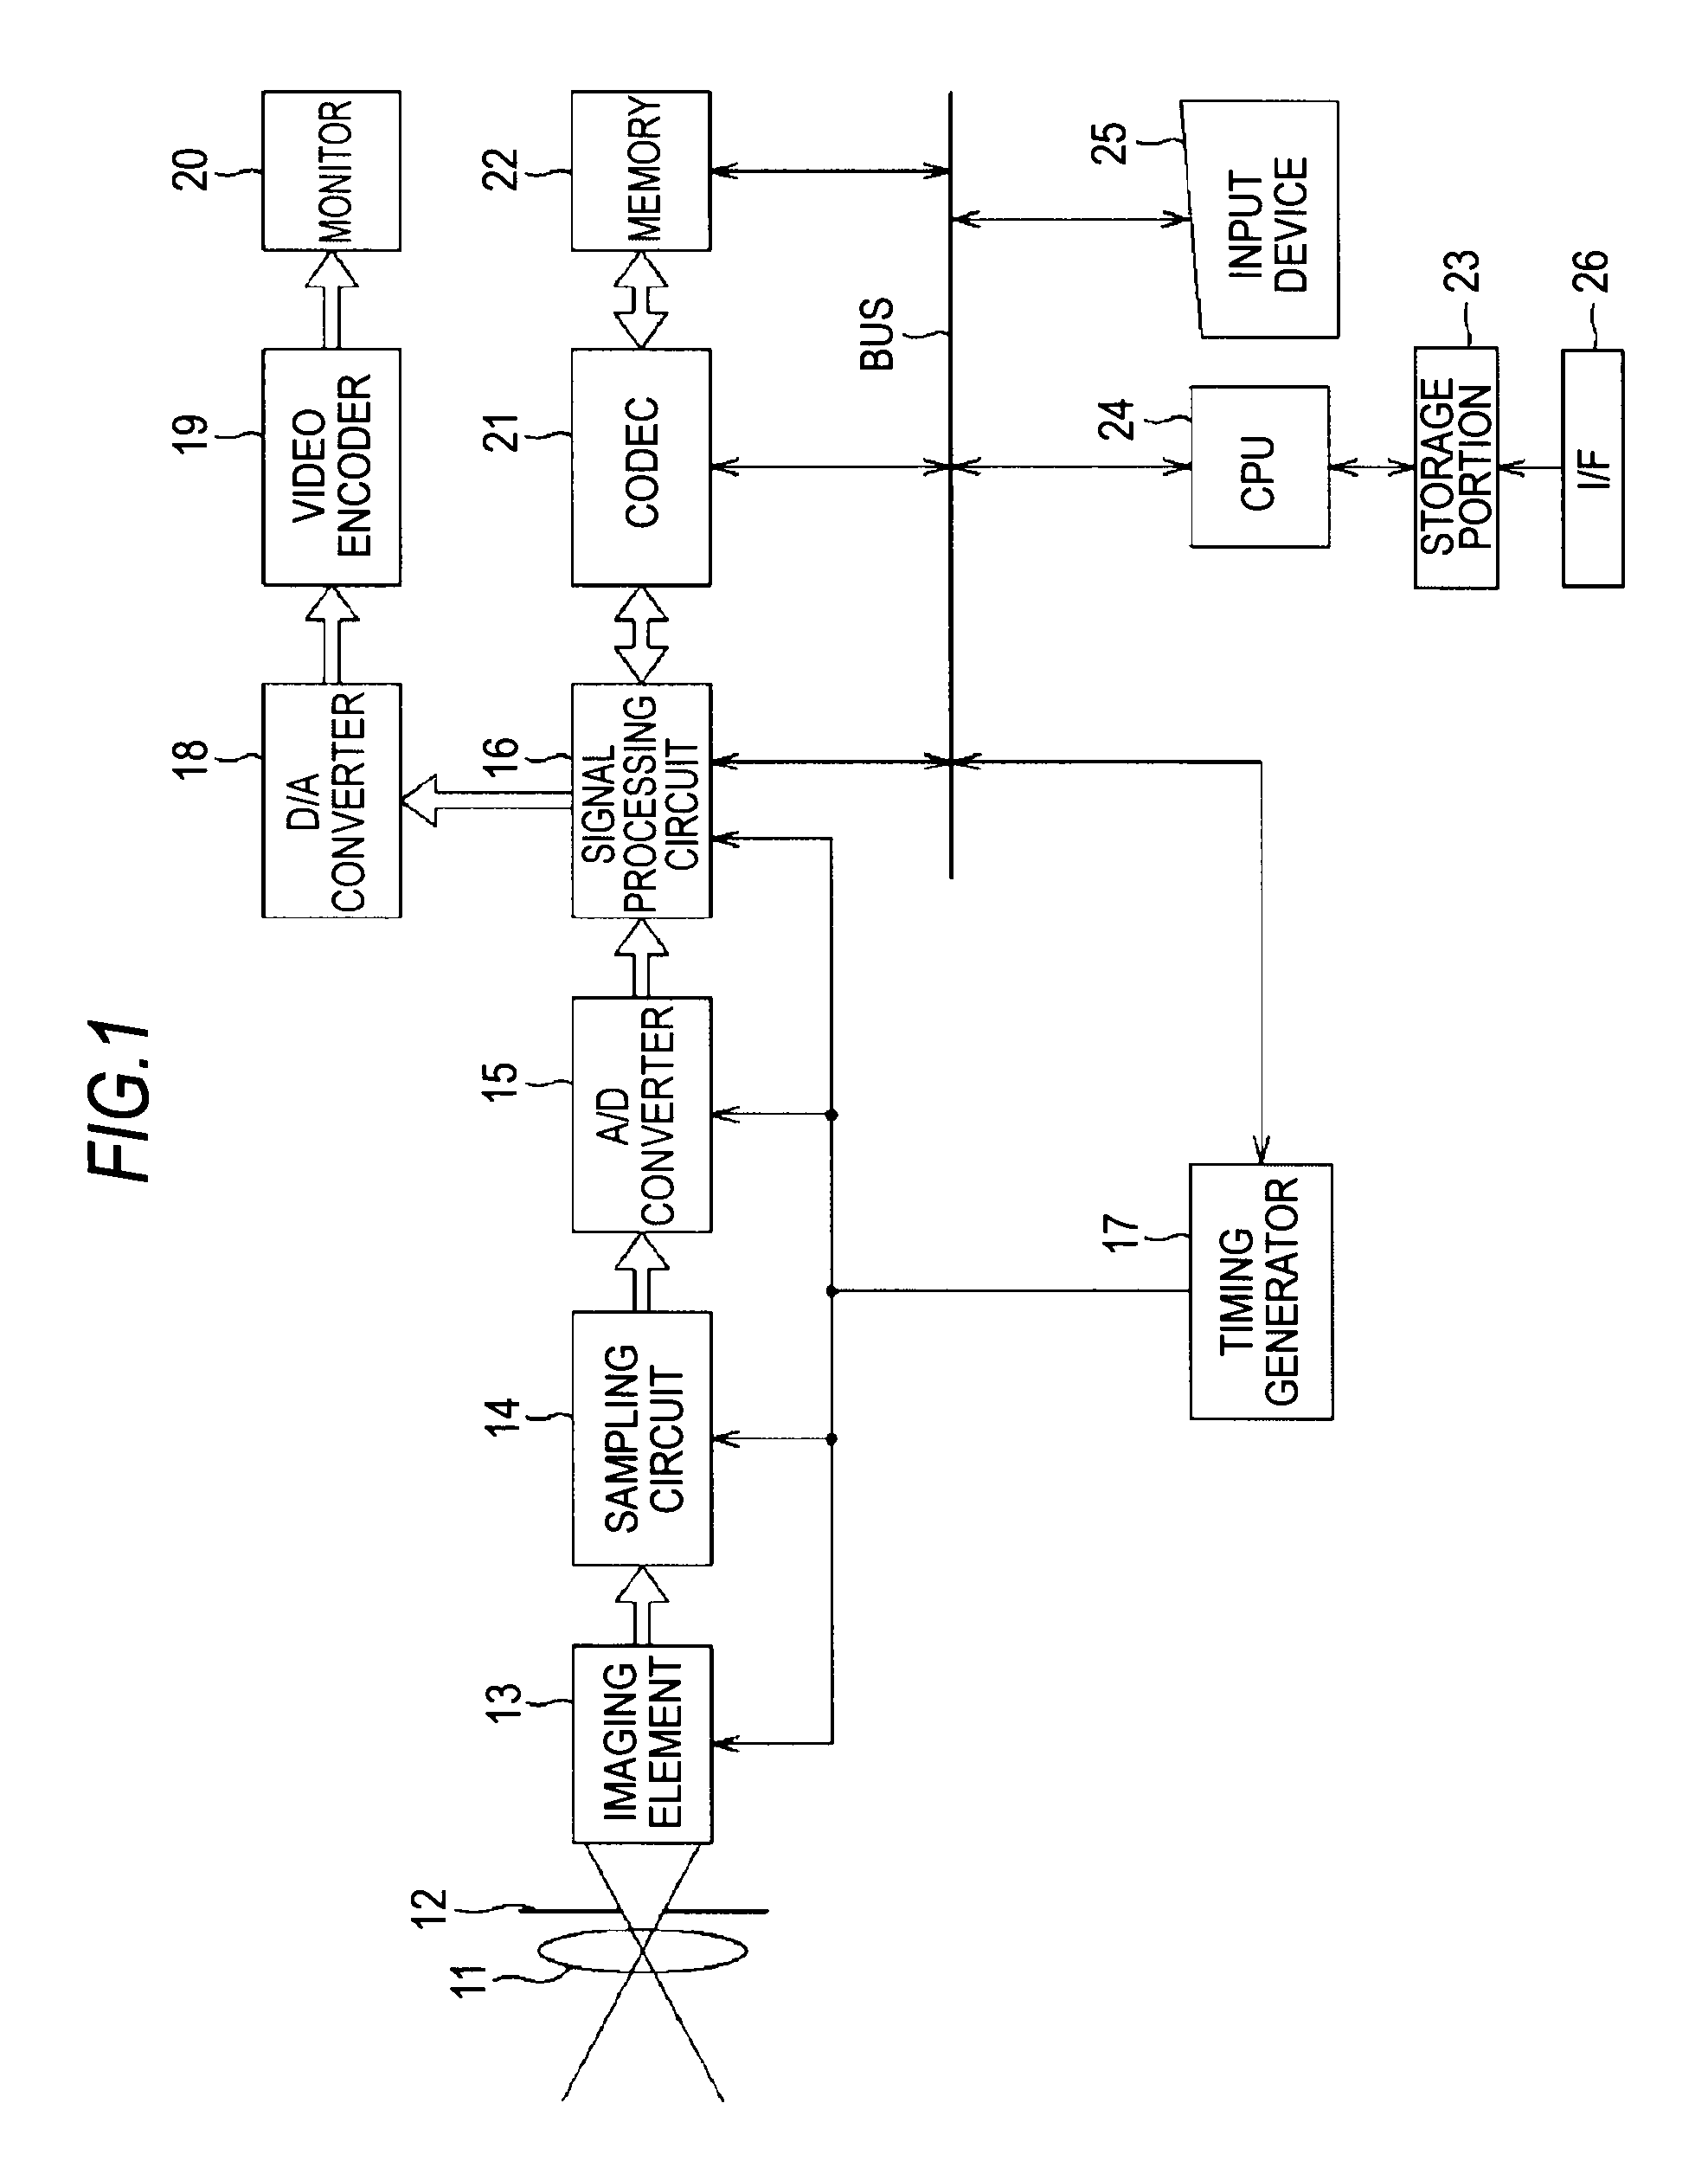 Image processing device and associated methodology of processing gradation noise